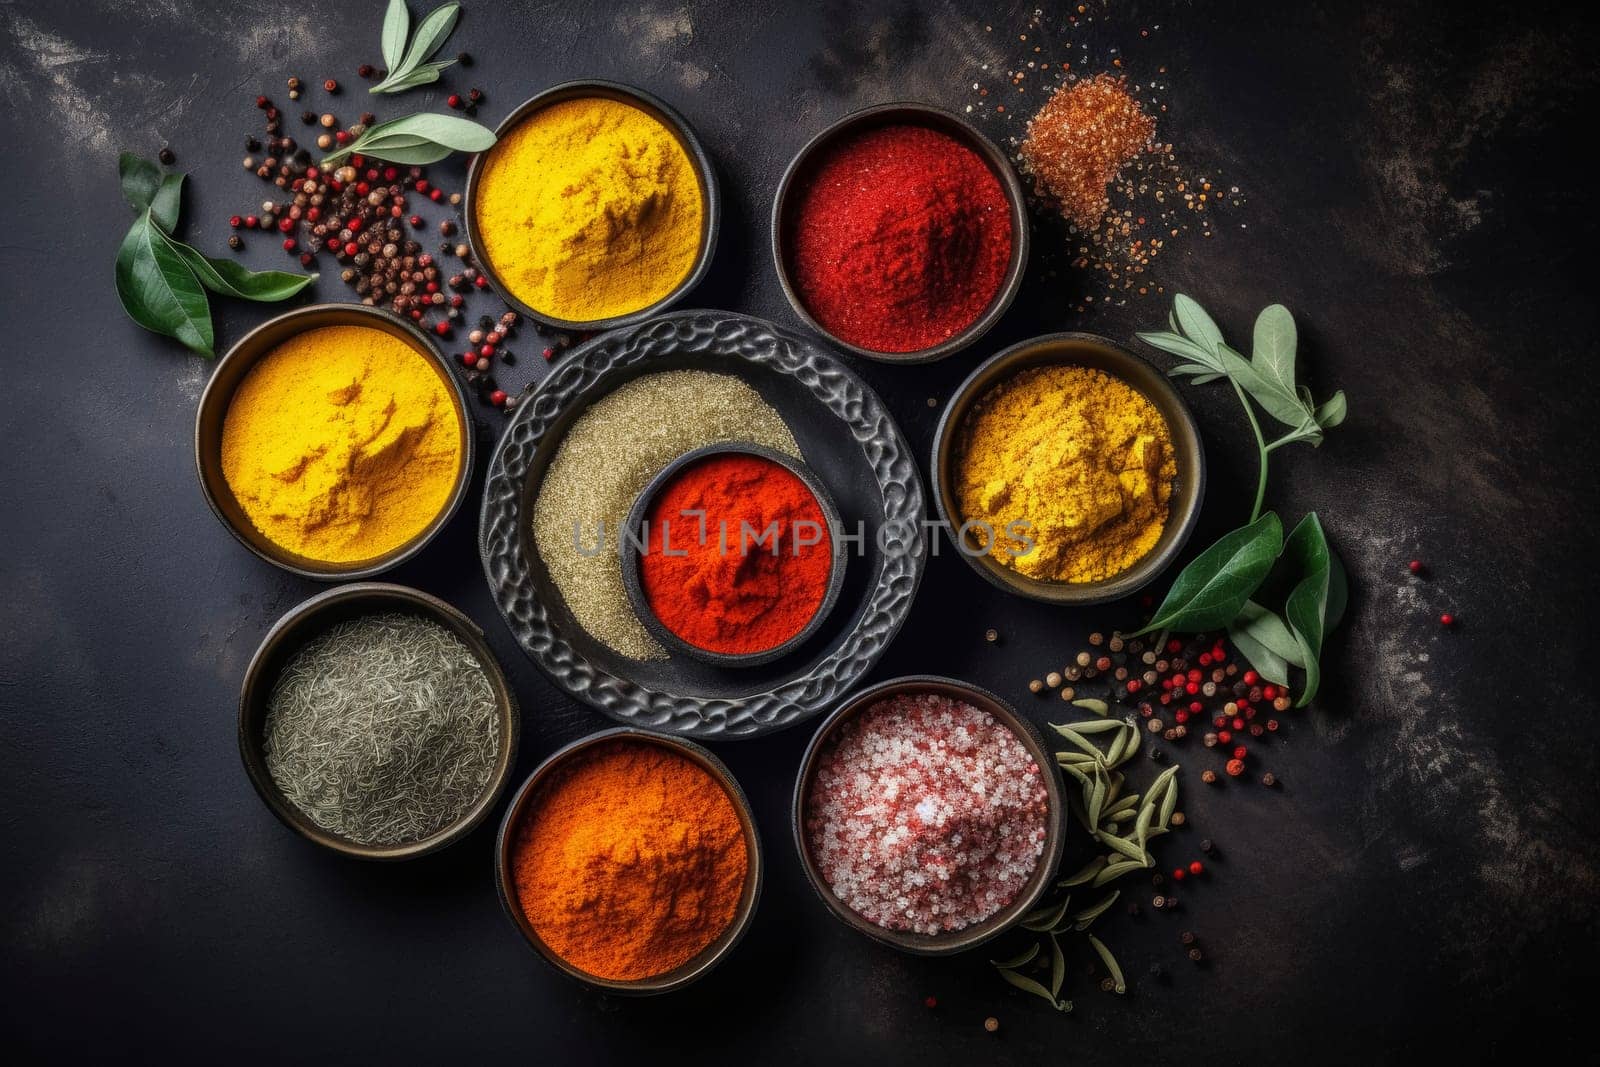 Assorted Spices in Bowls on Dark Background by andreyz